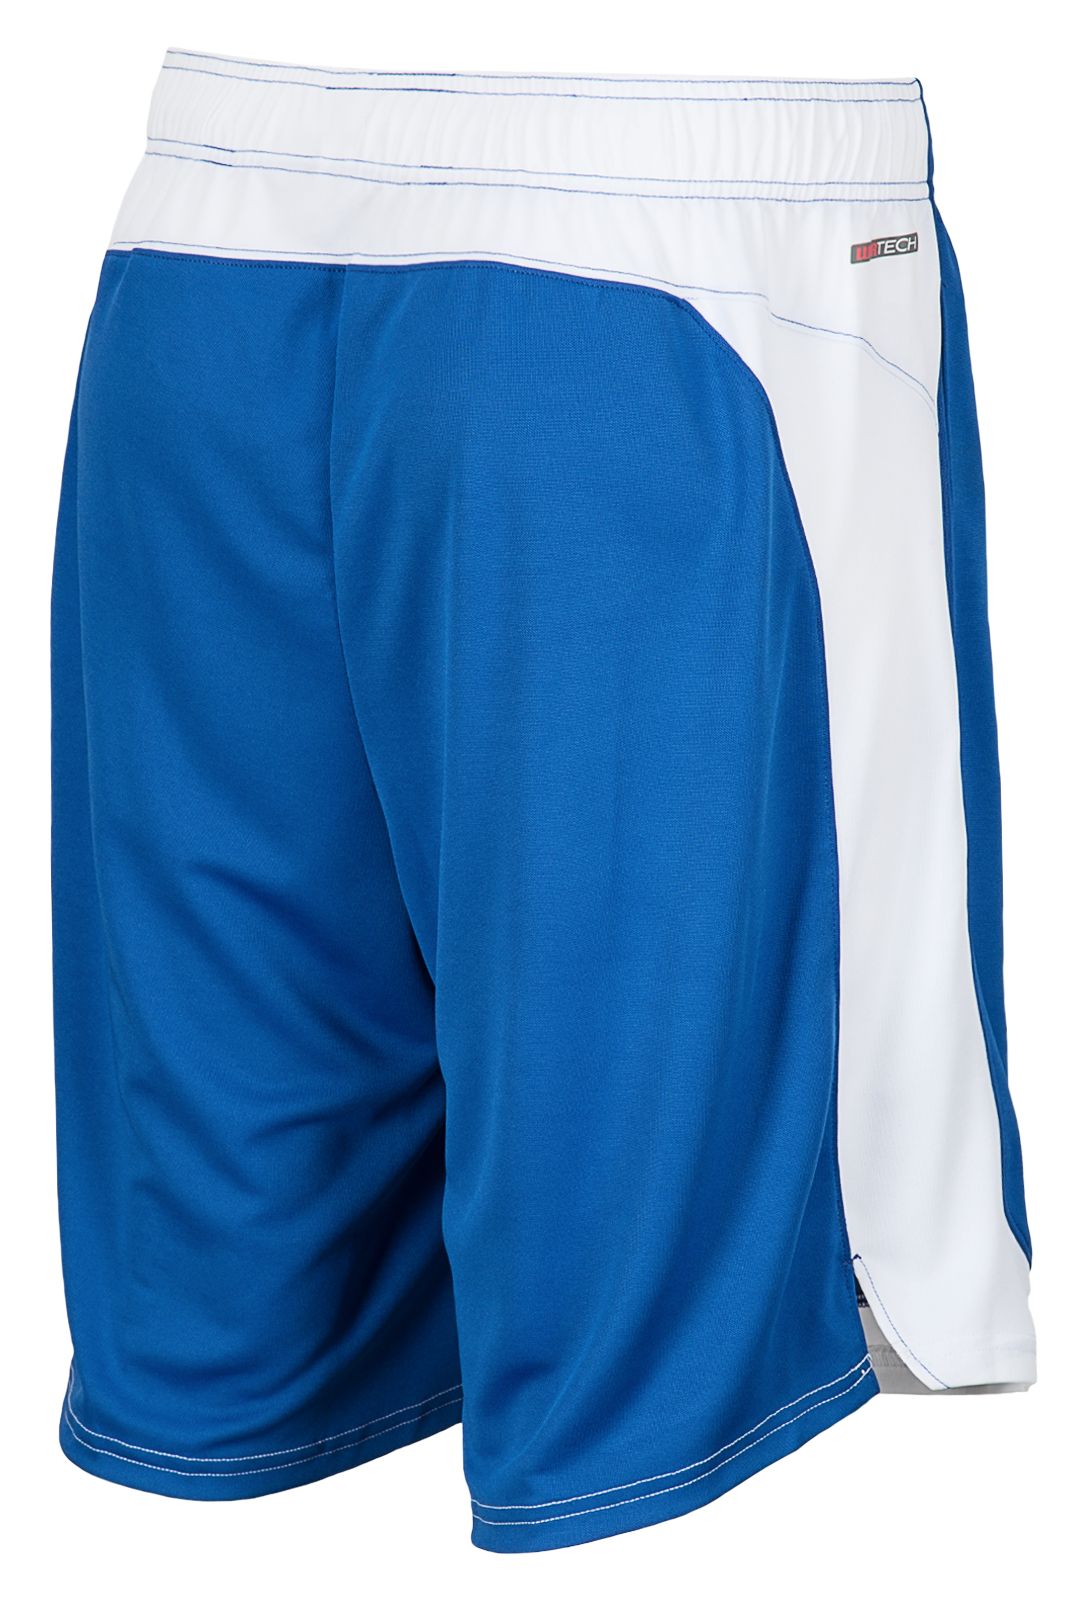 Next Tech Short, Royal Blue with White image number 0